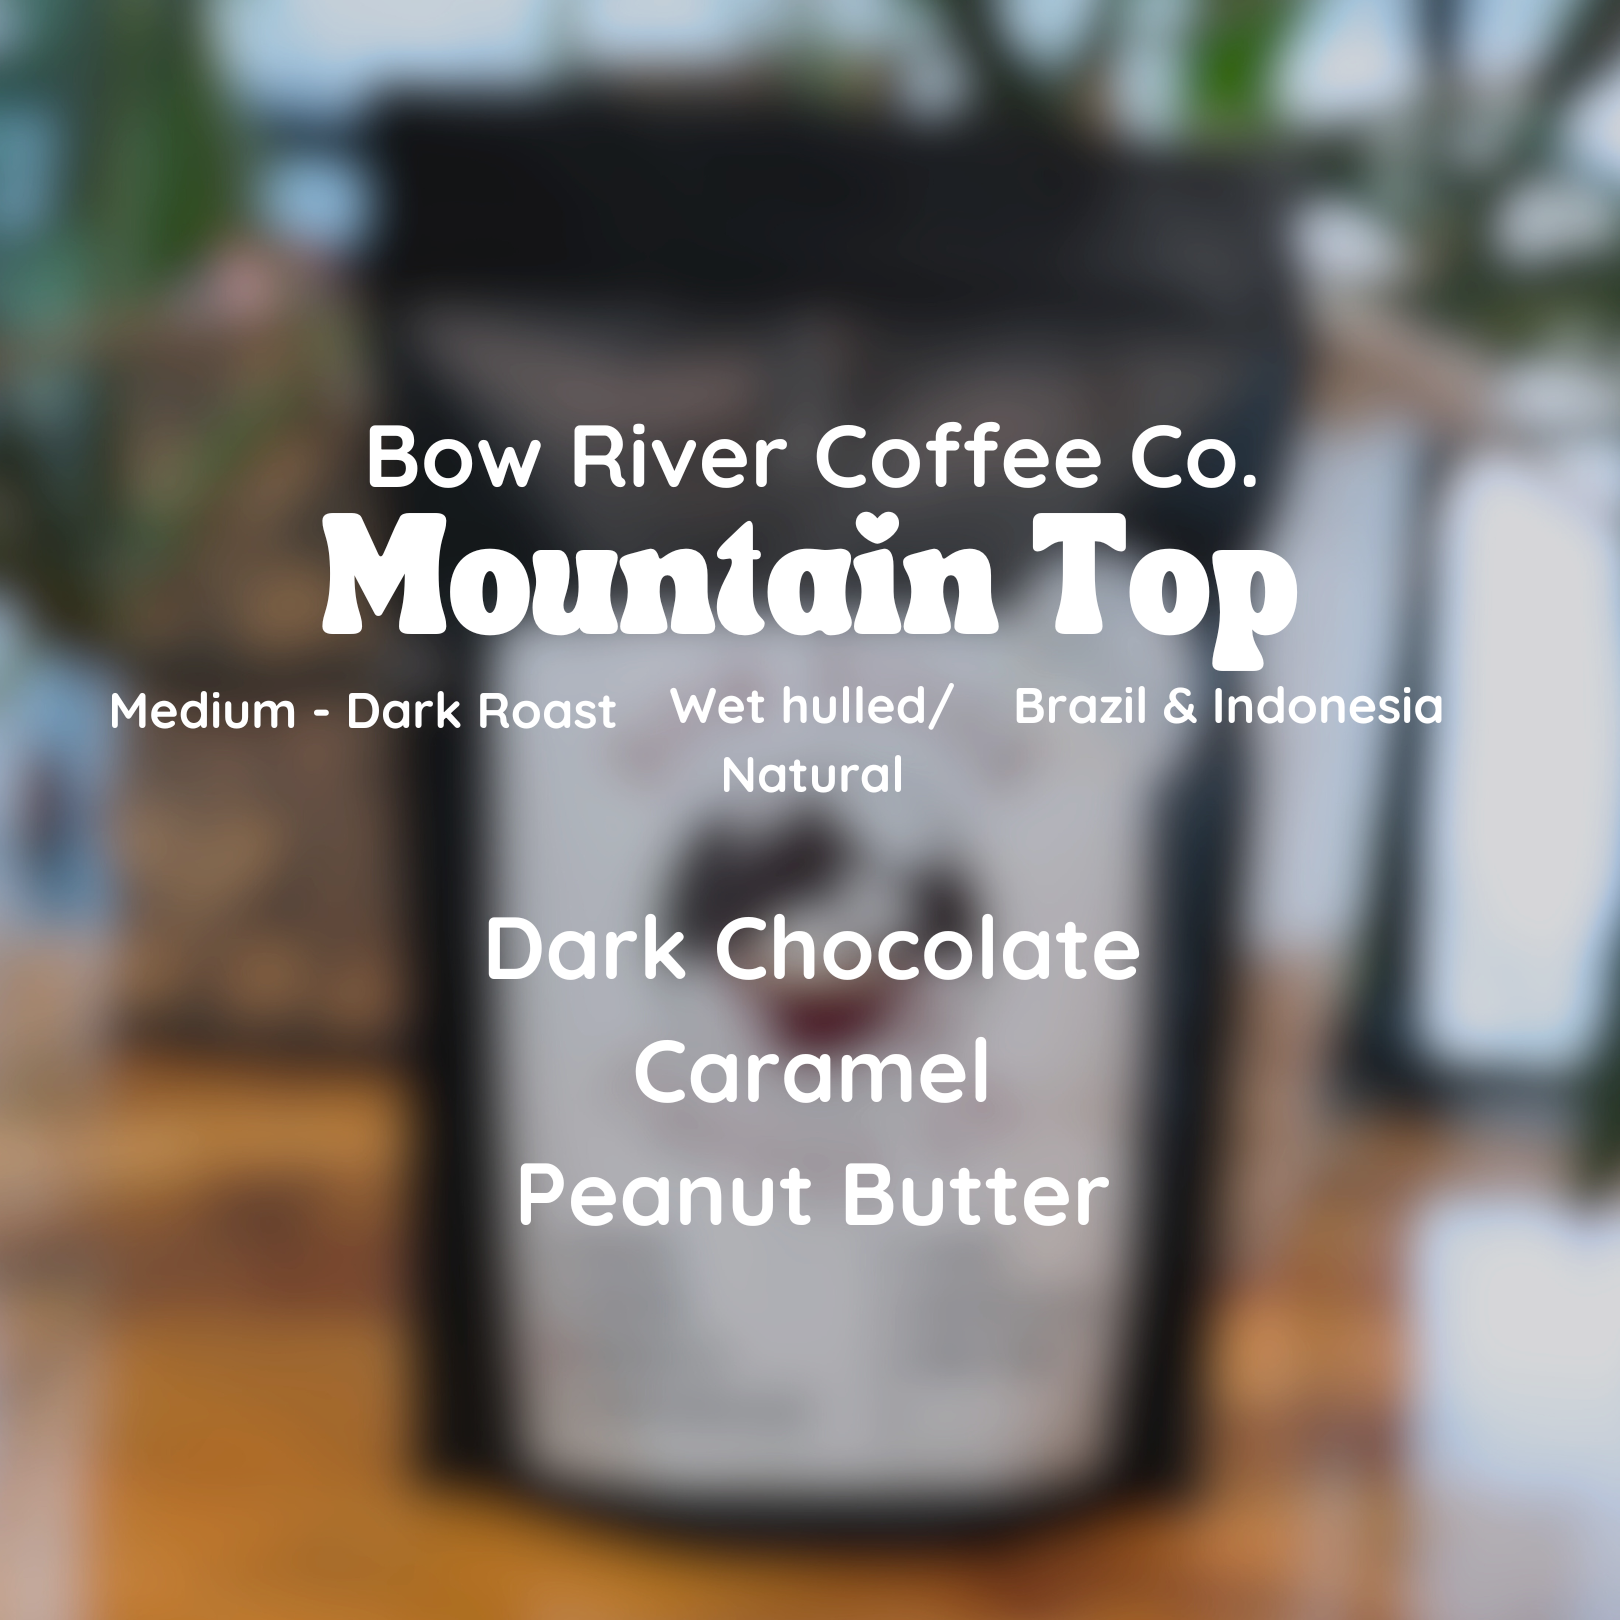 Bow River Coffee Co. Mountain Top Coffee Beans